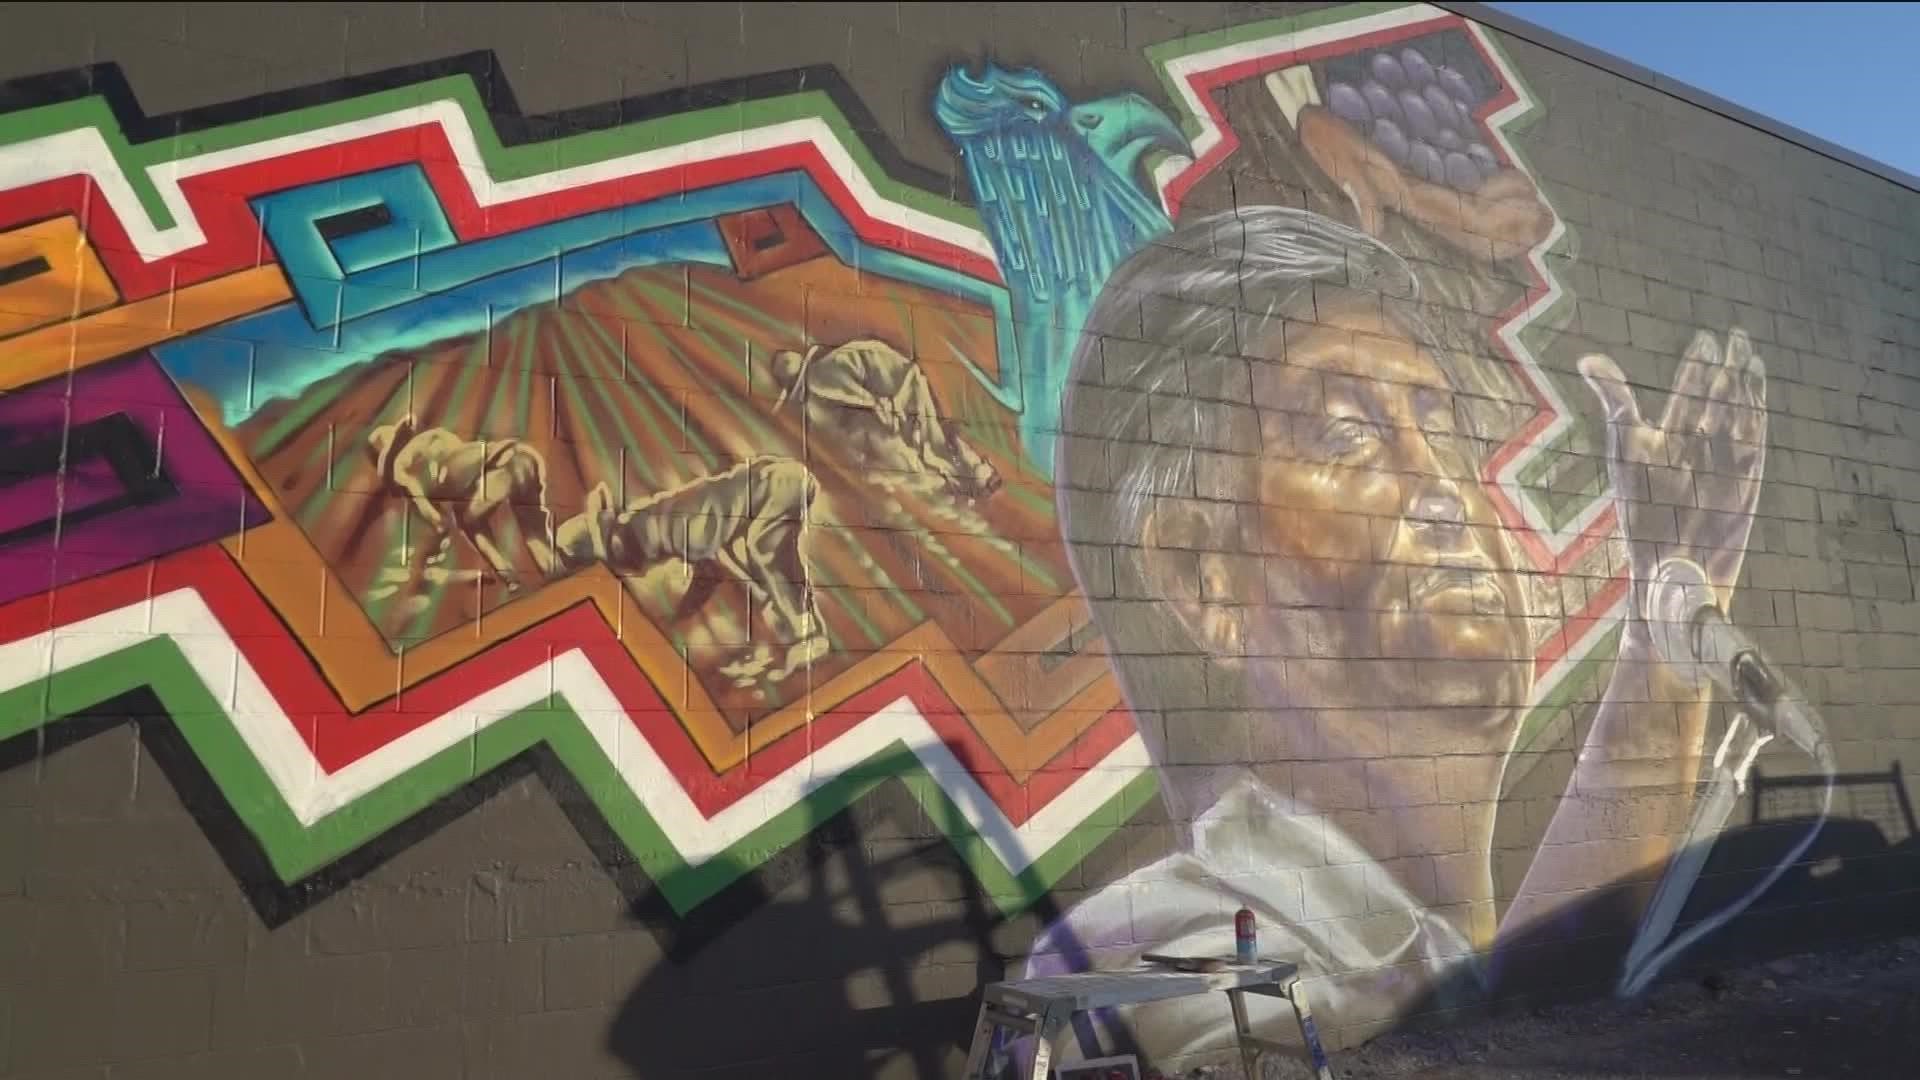 A new mural is up in East Austin depicting labor leader and civil rights activist Cesar Chavez.